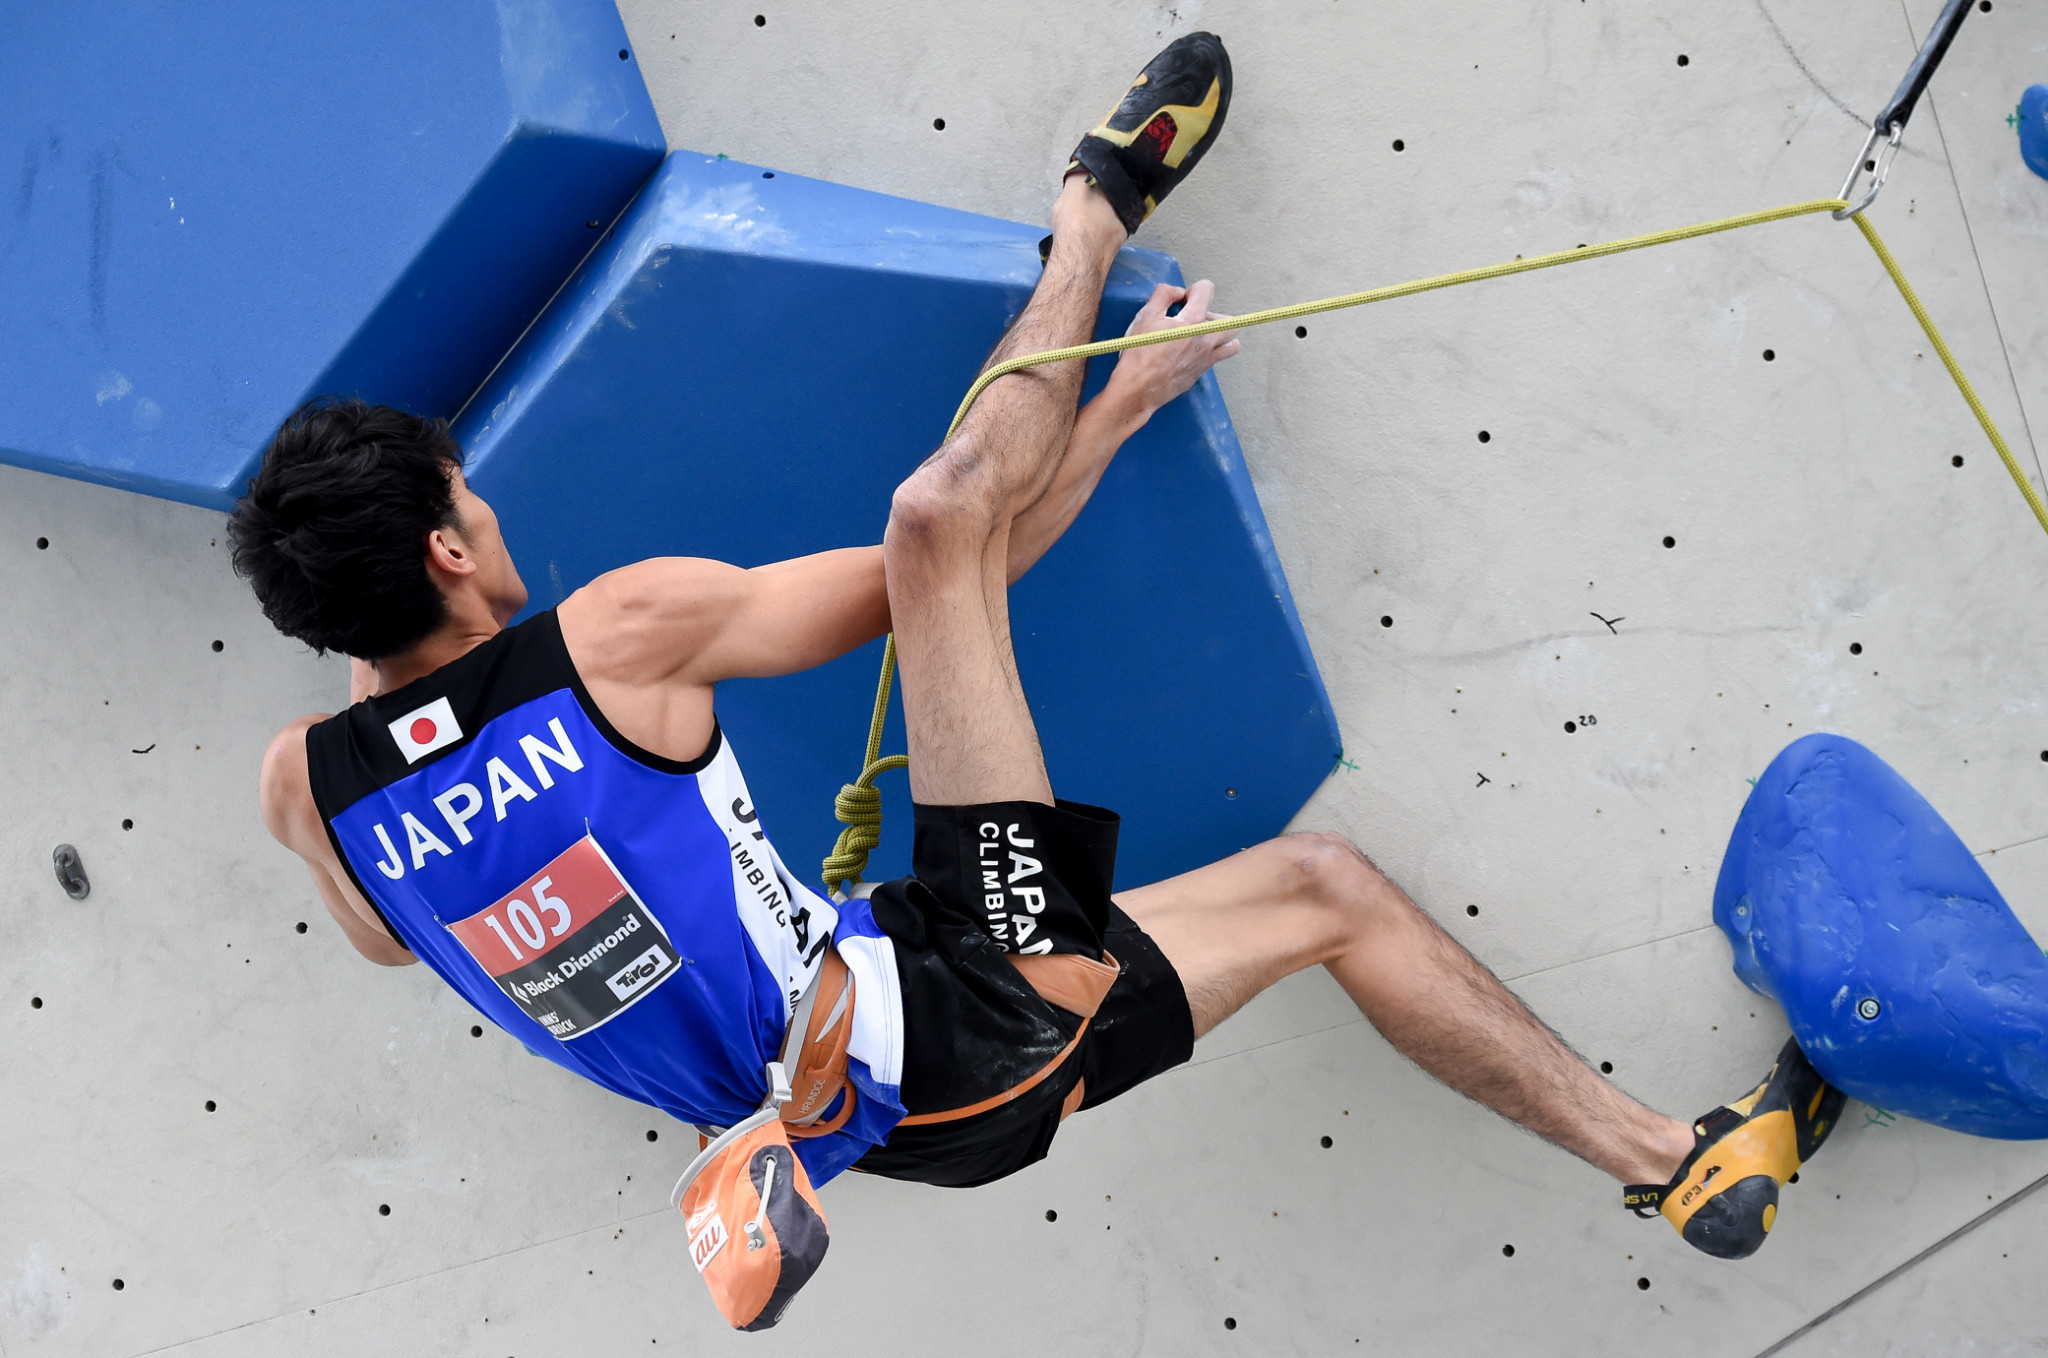 Meichi Narasaki of Japan won the men's bouldering event at the IFSC Asian Championships ©Getty Images